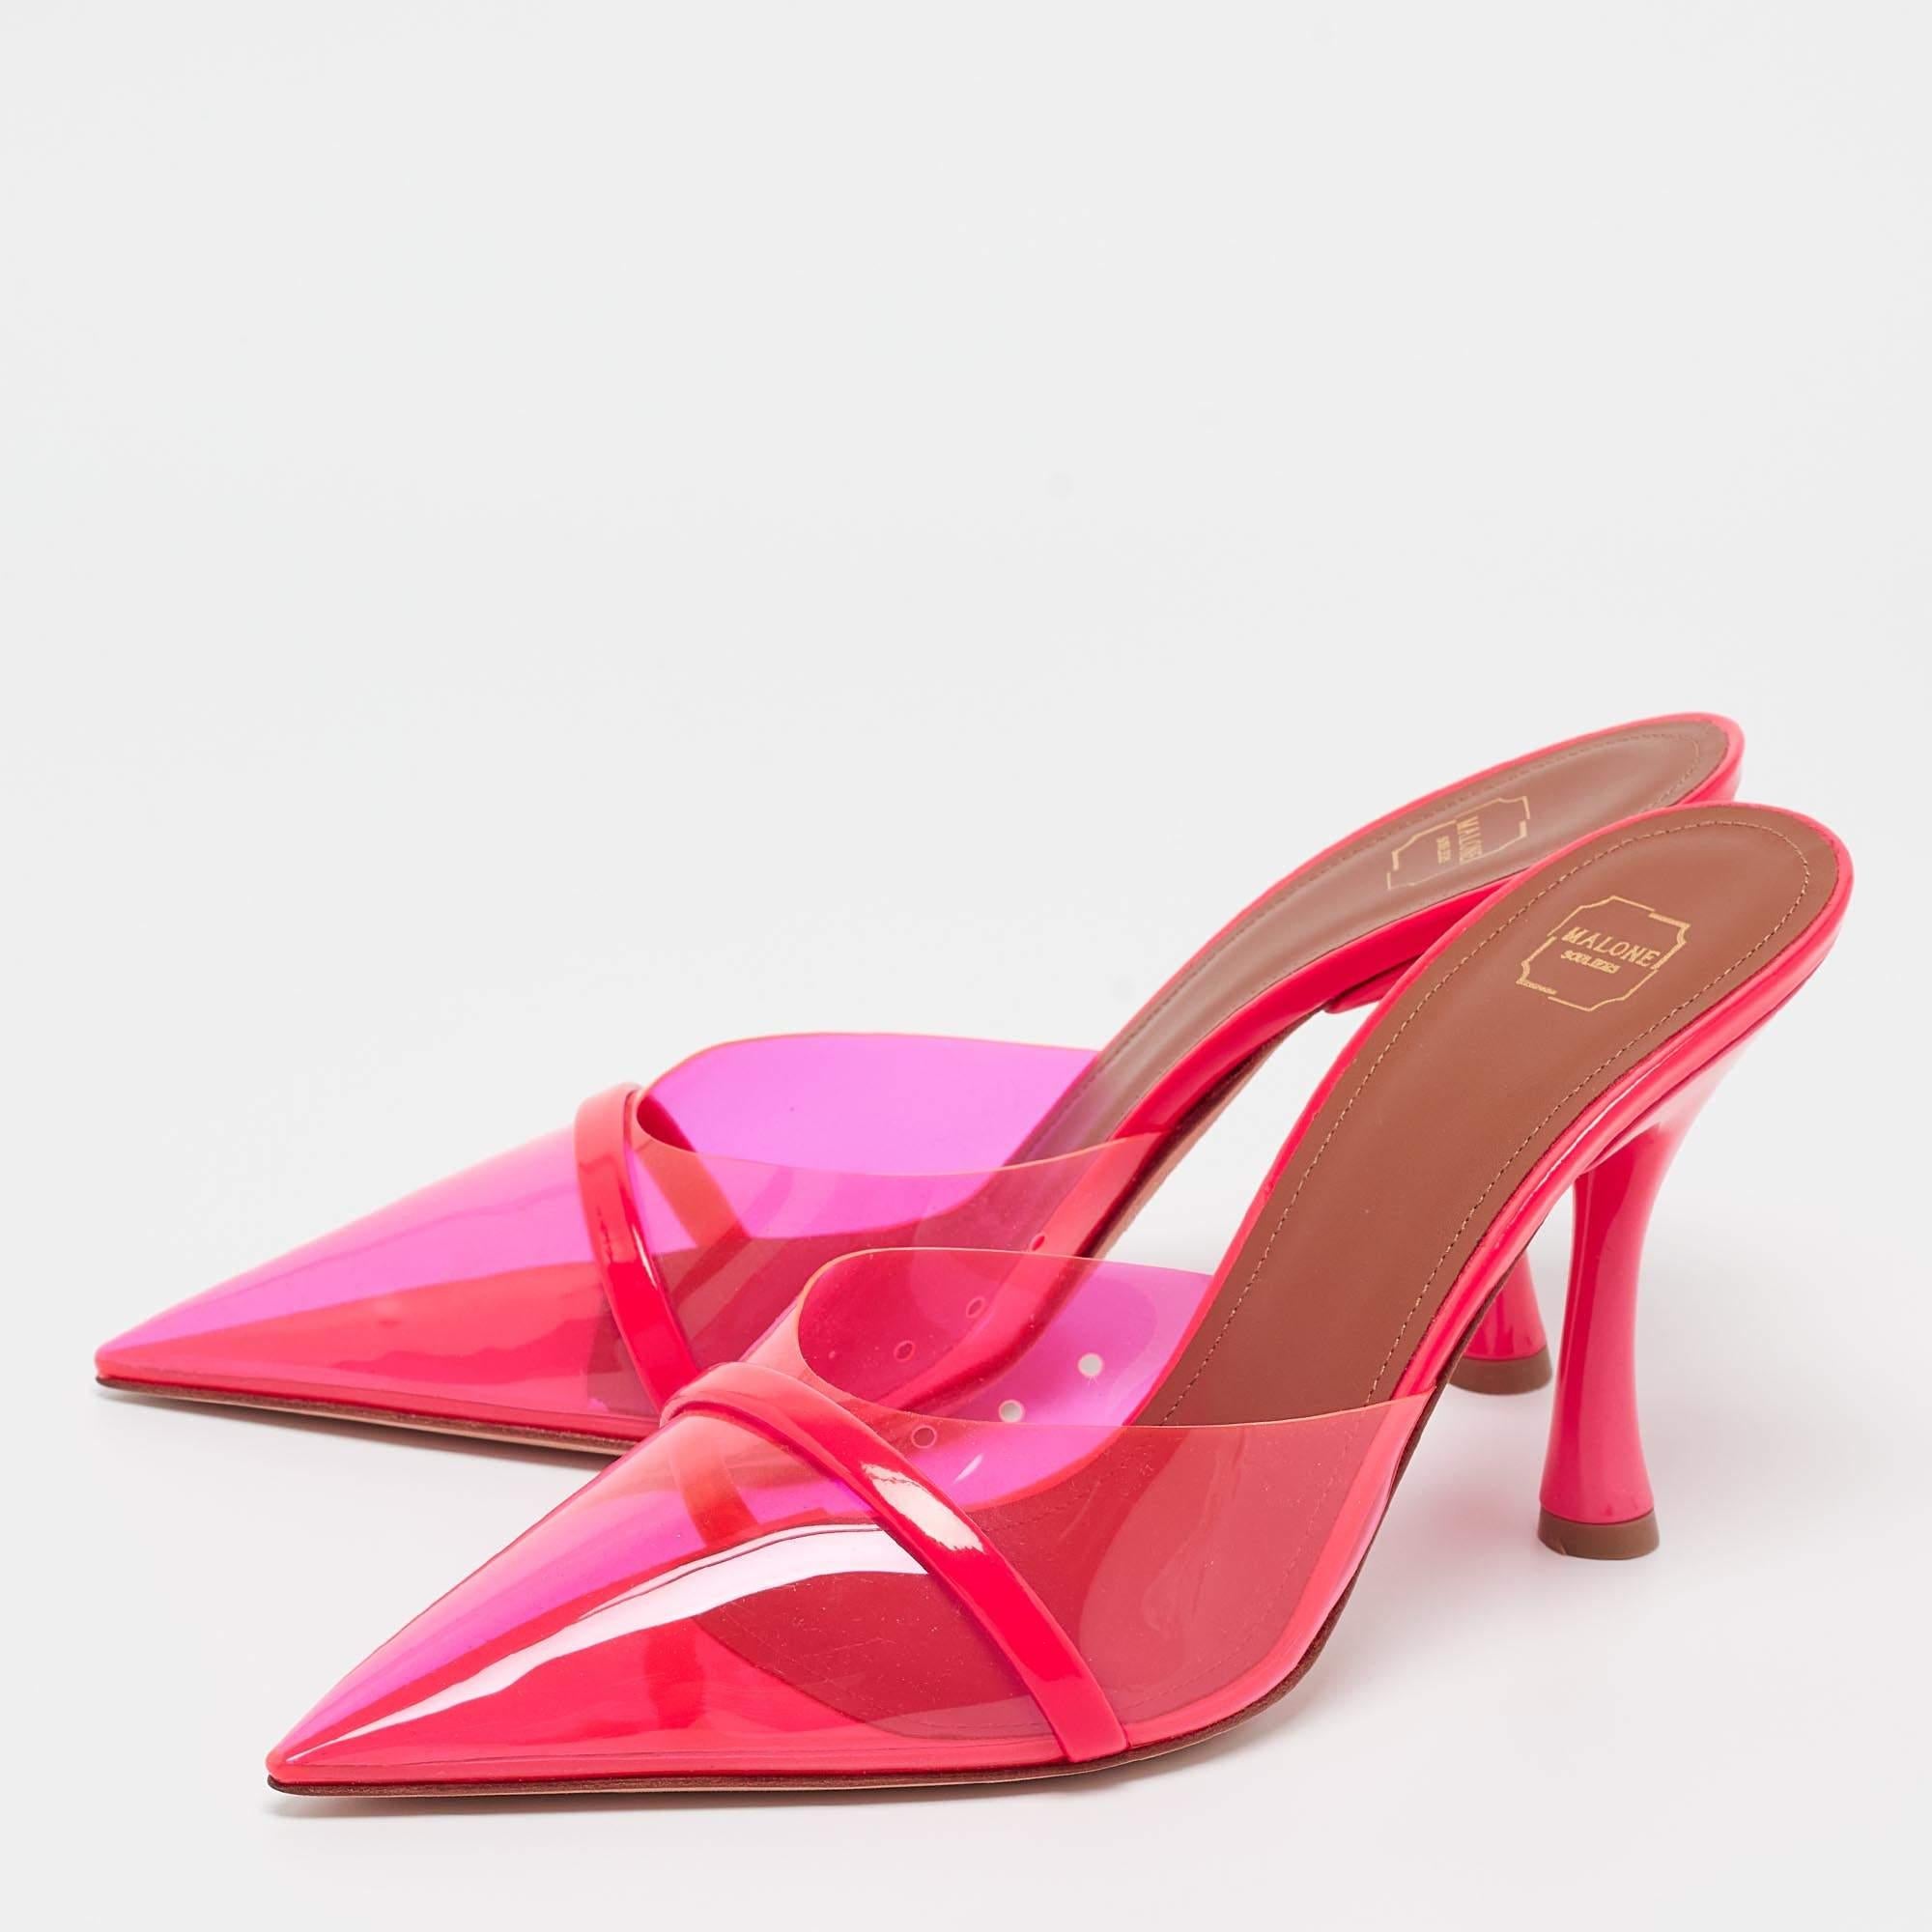 Malone Souliers Pink PVC and Patent Leather Joella Mules Size 38 In Excellent Condition For Sale In Dubai, Al Qouz 2